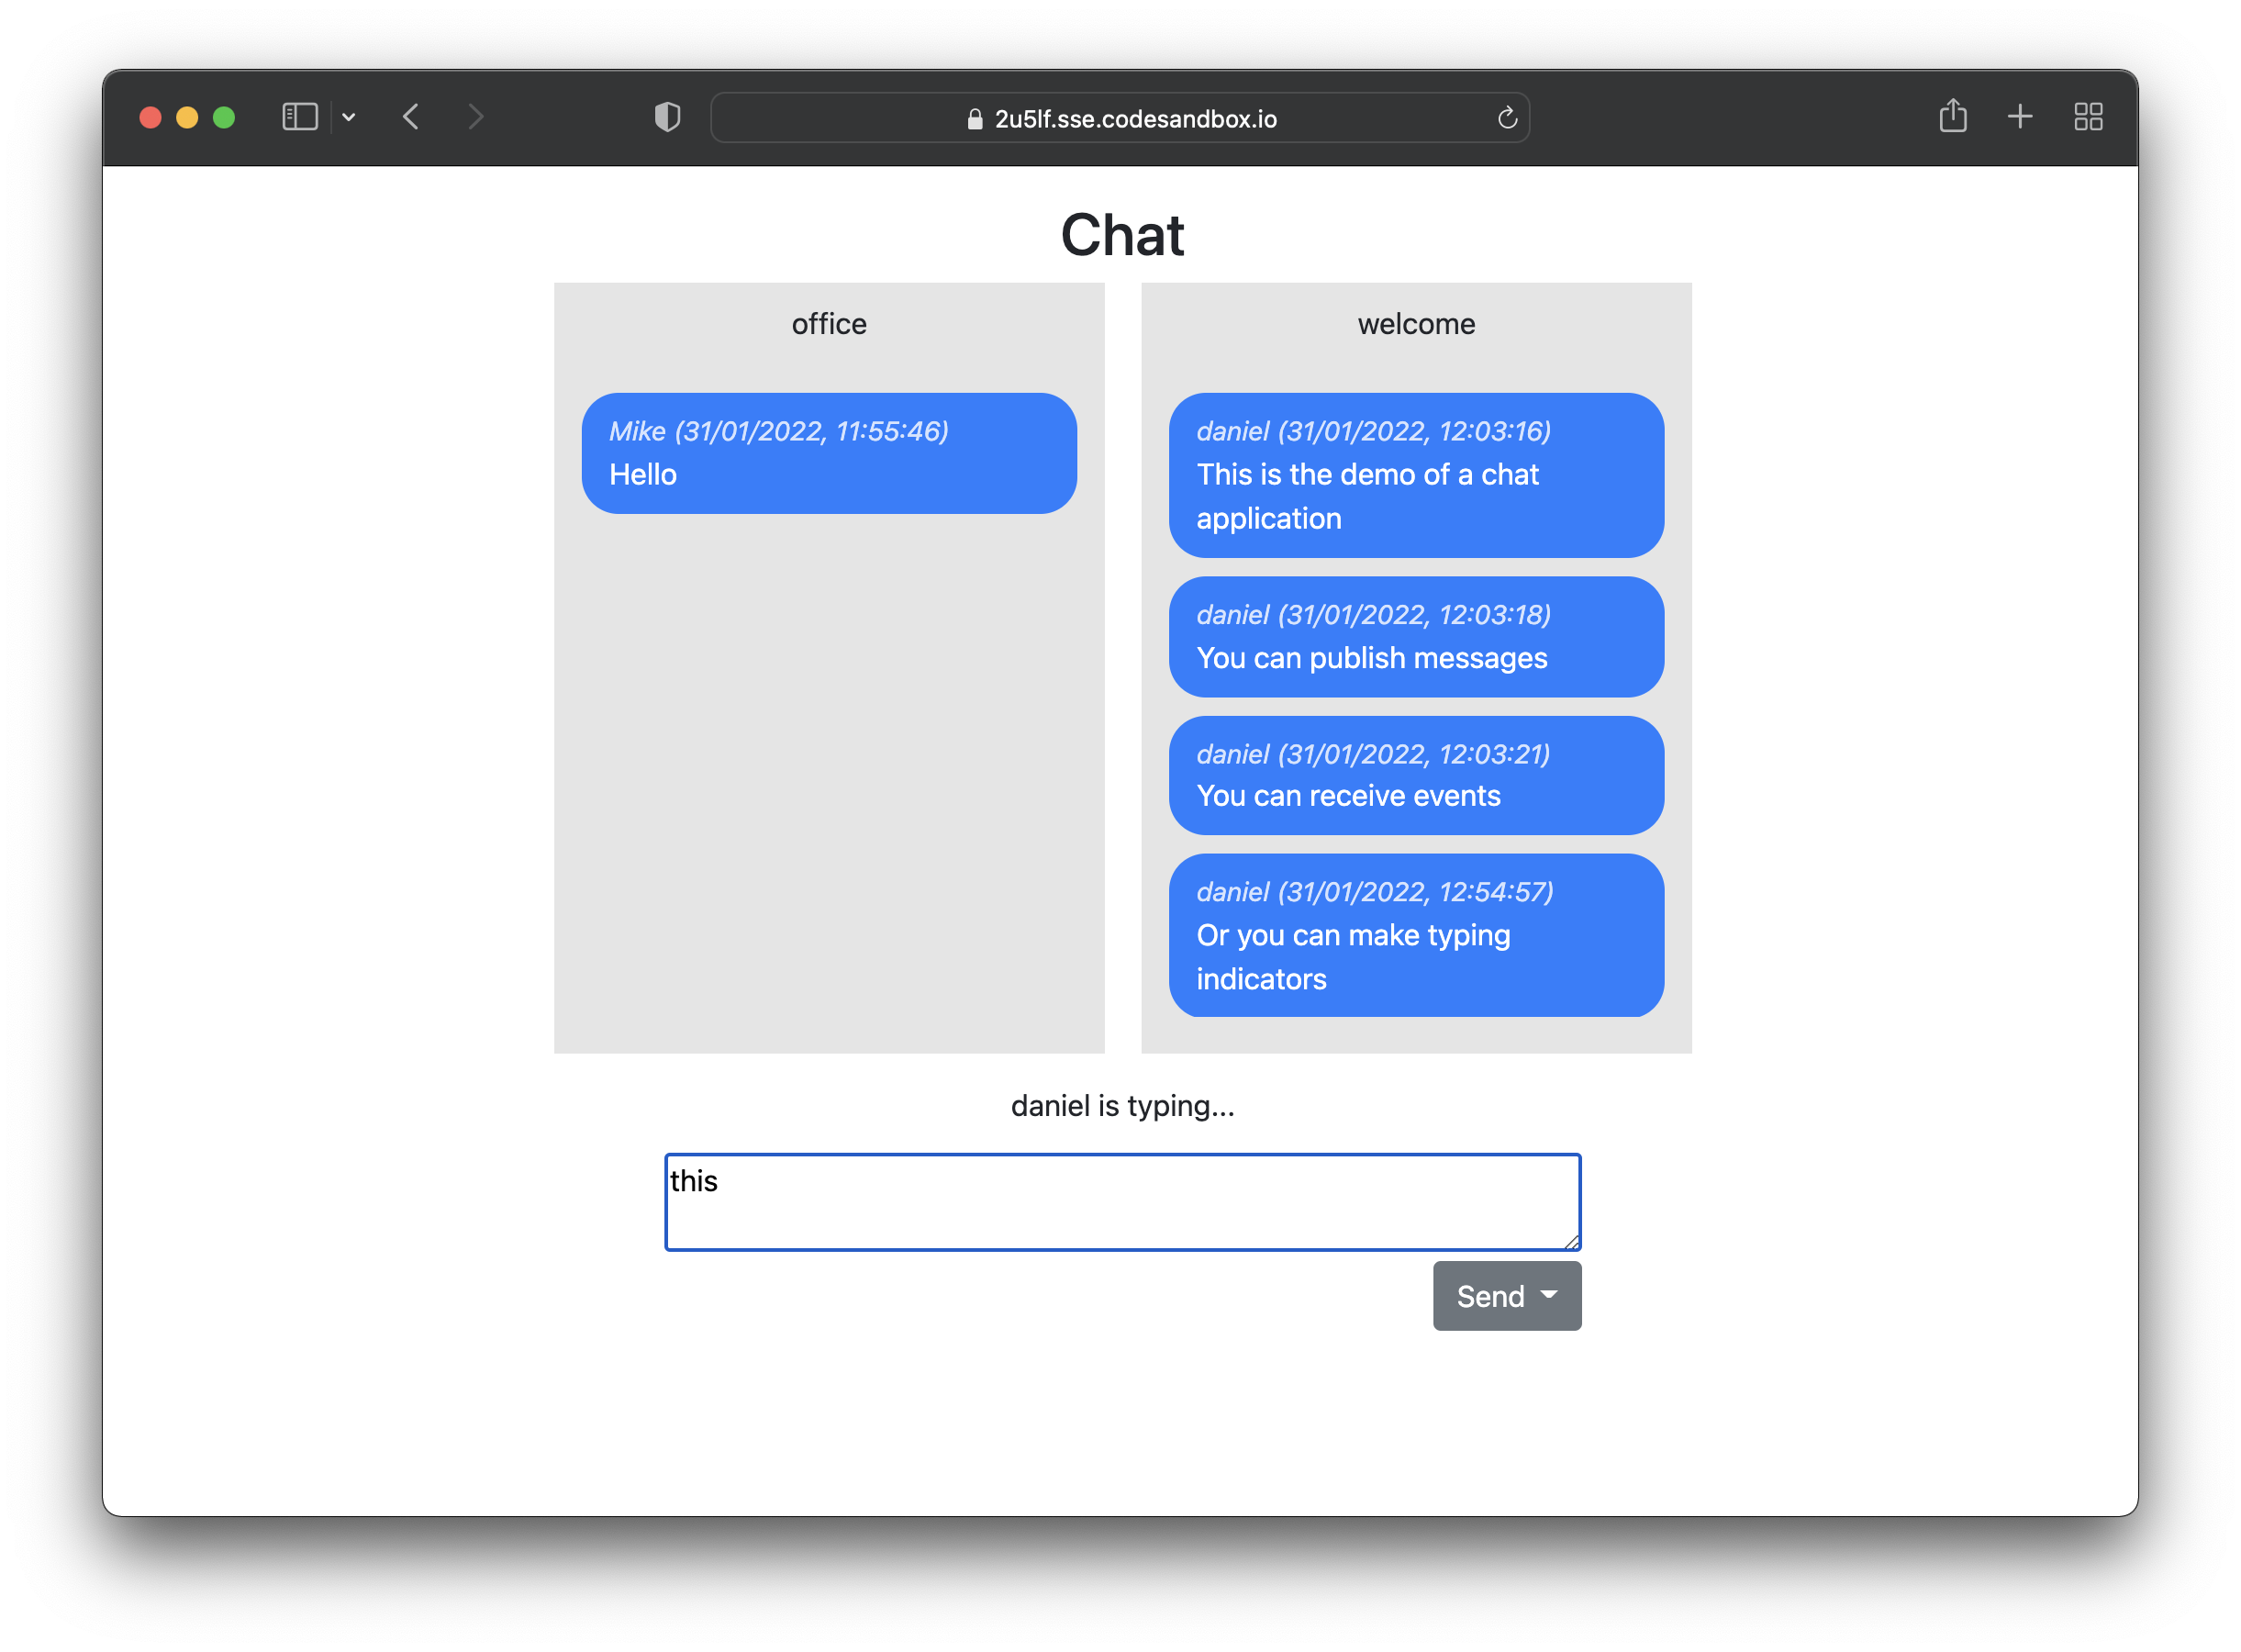 The chat application that we are going to build.